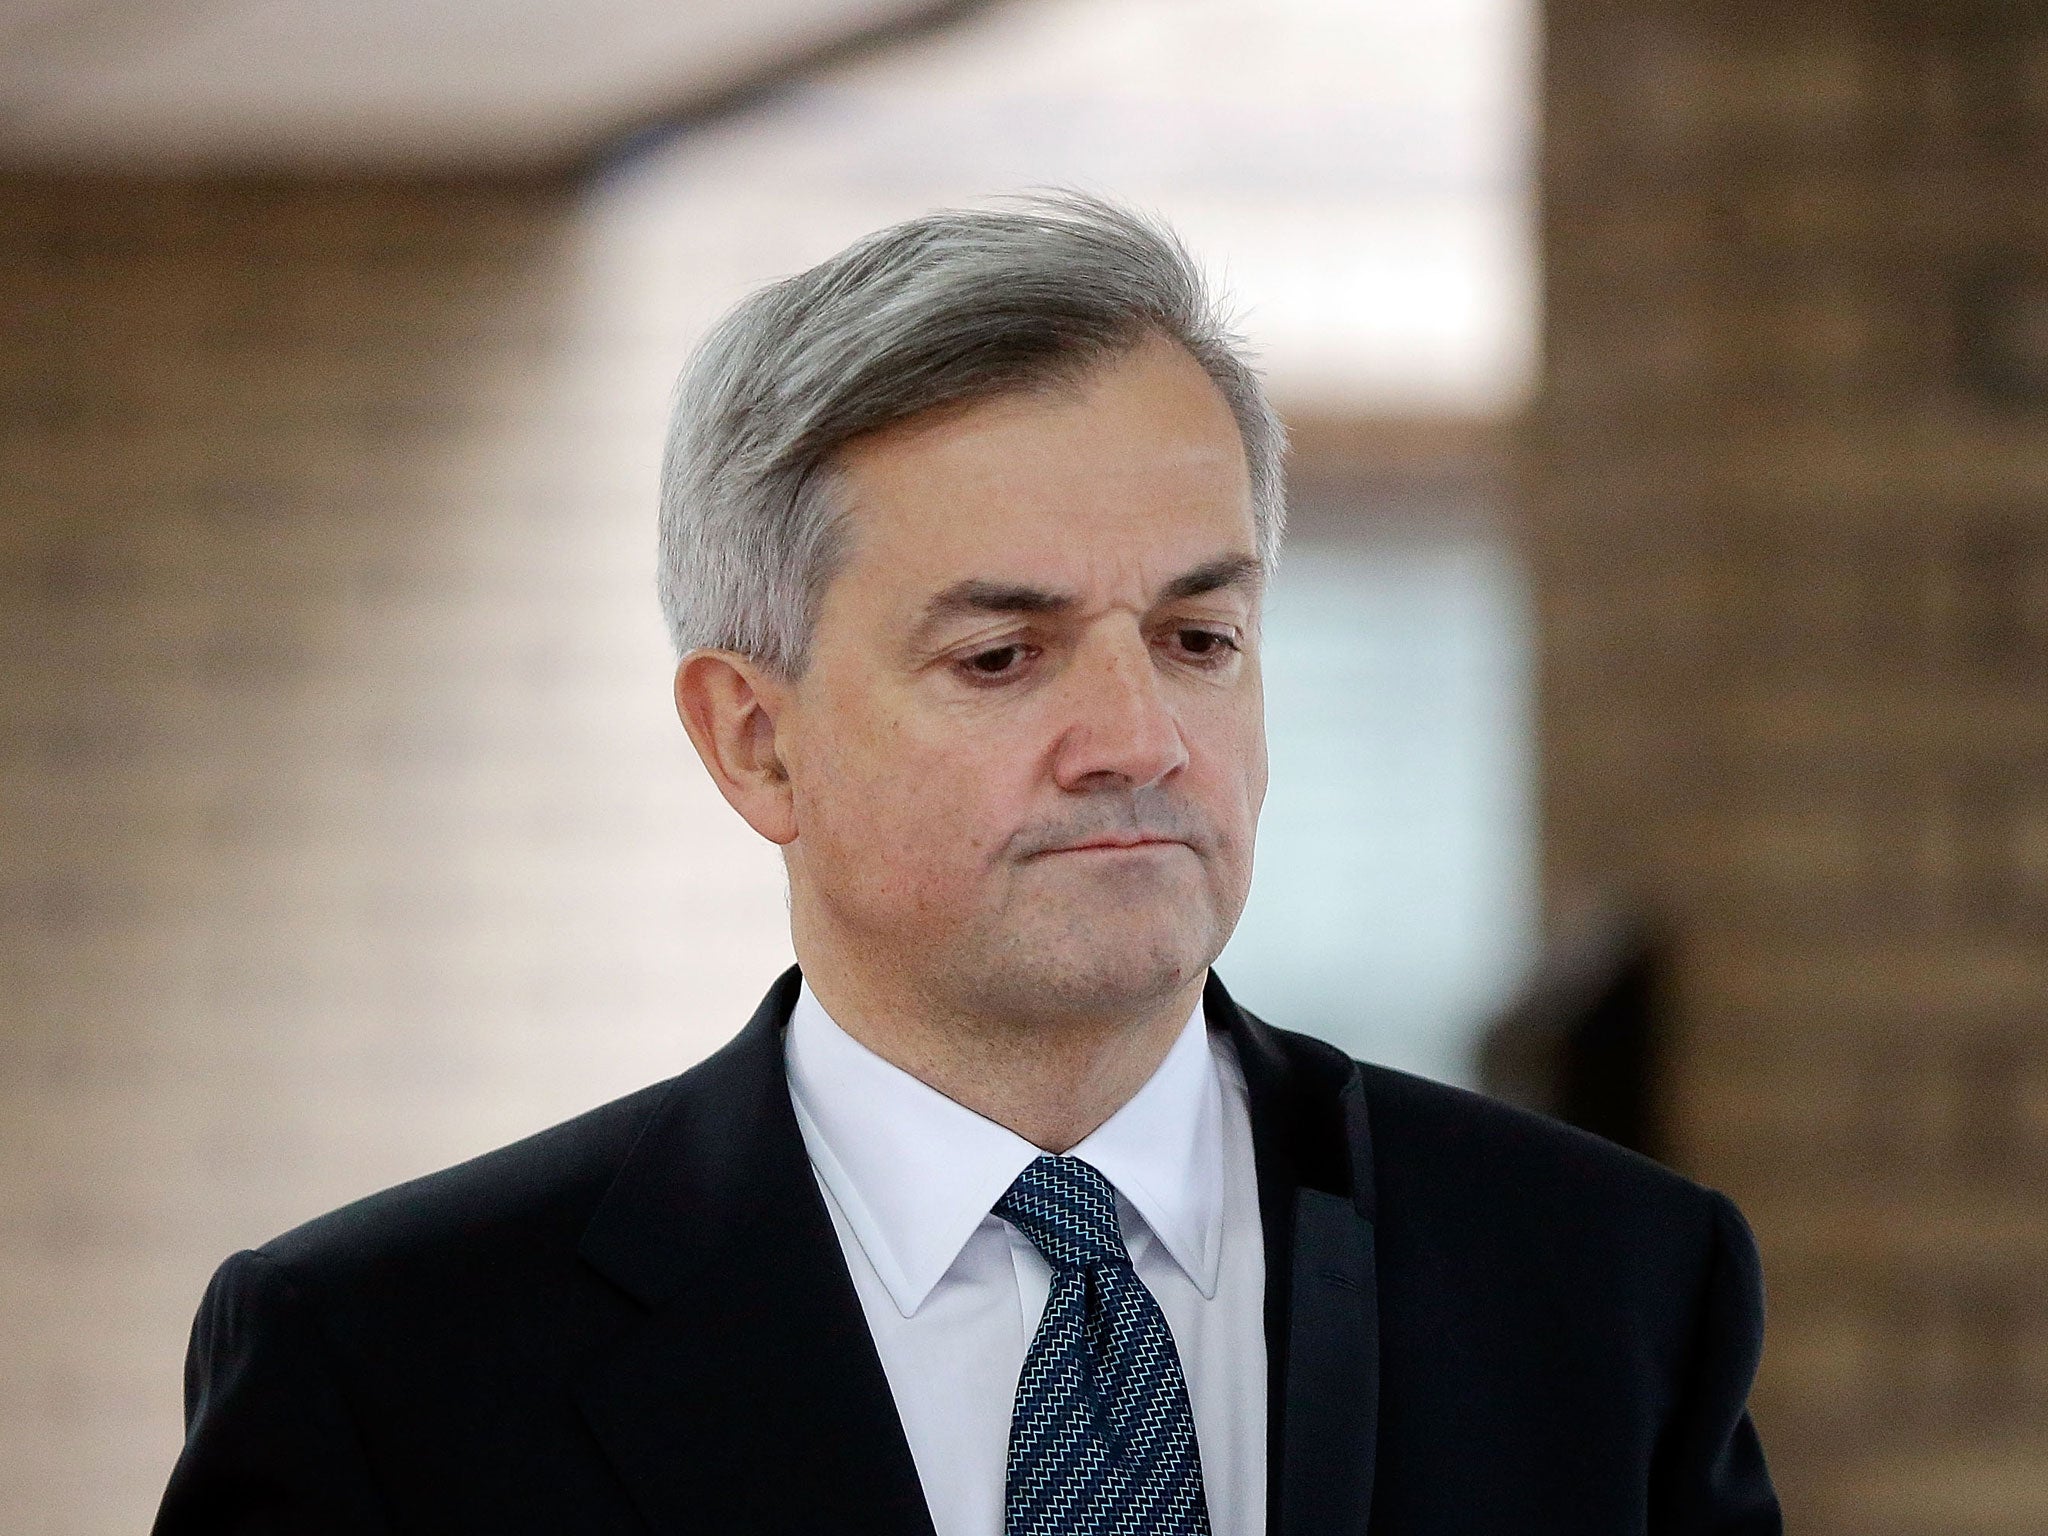 Former Cabinet Minister Chris Huhne leaves Southwark Crown Court in February